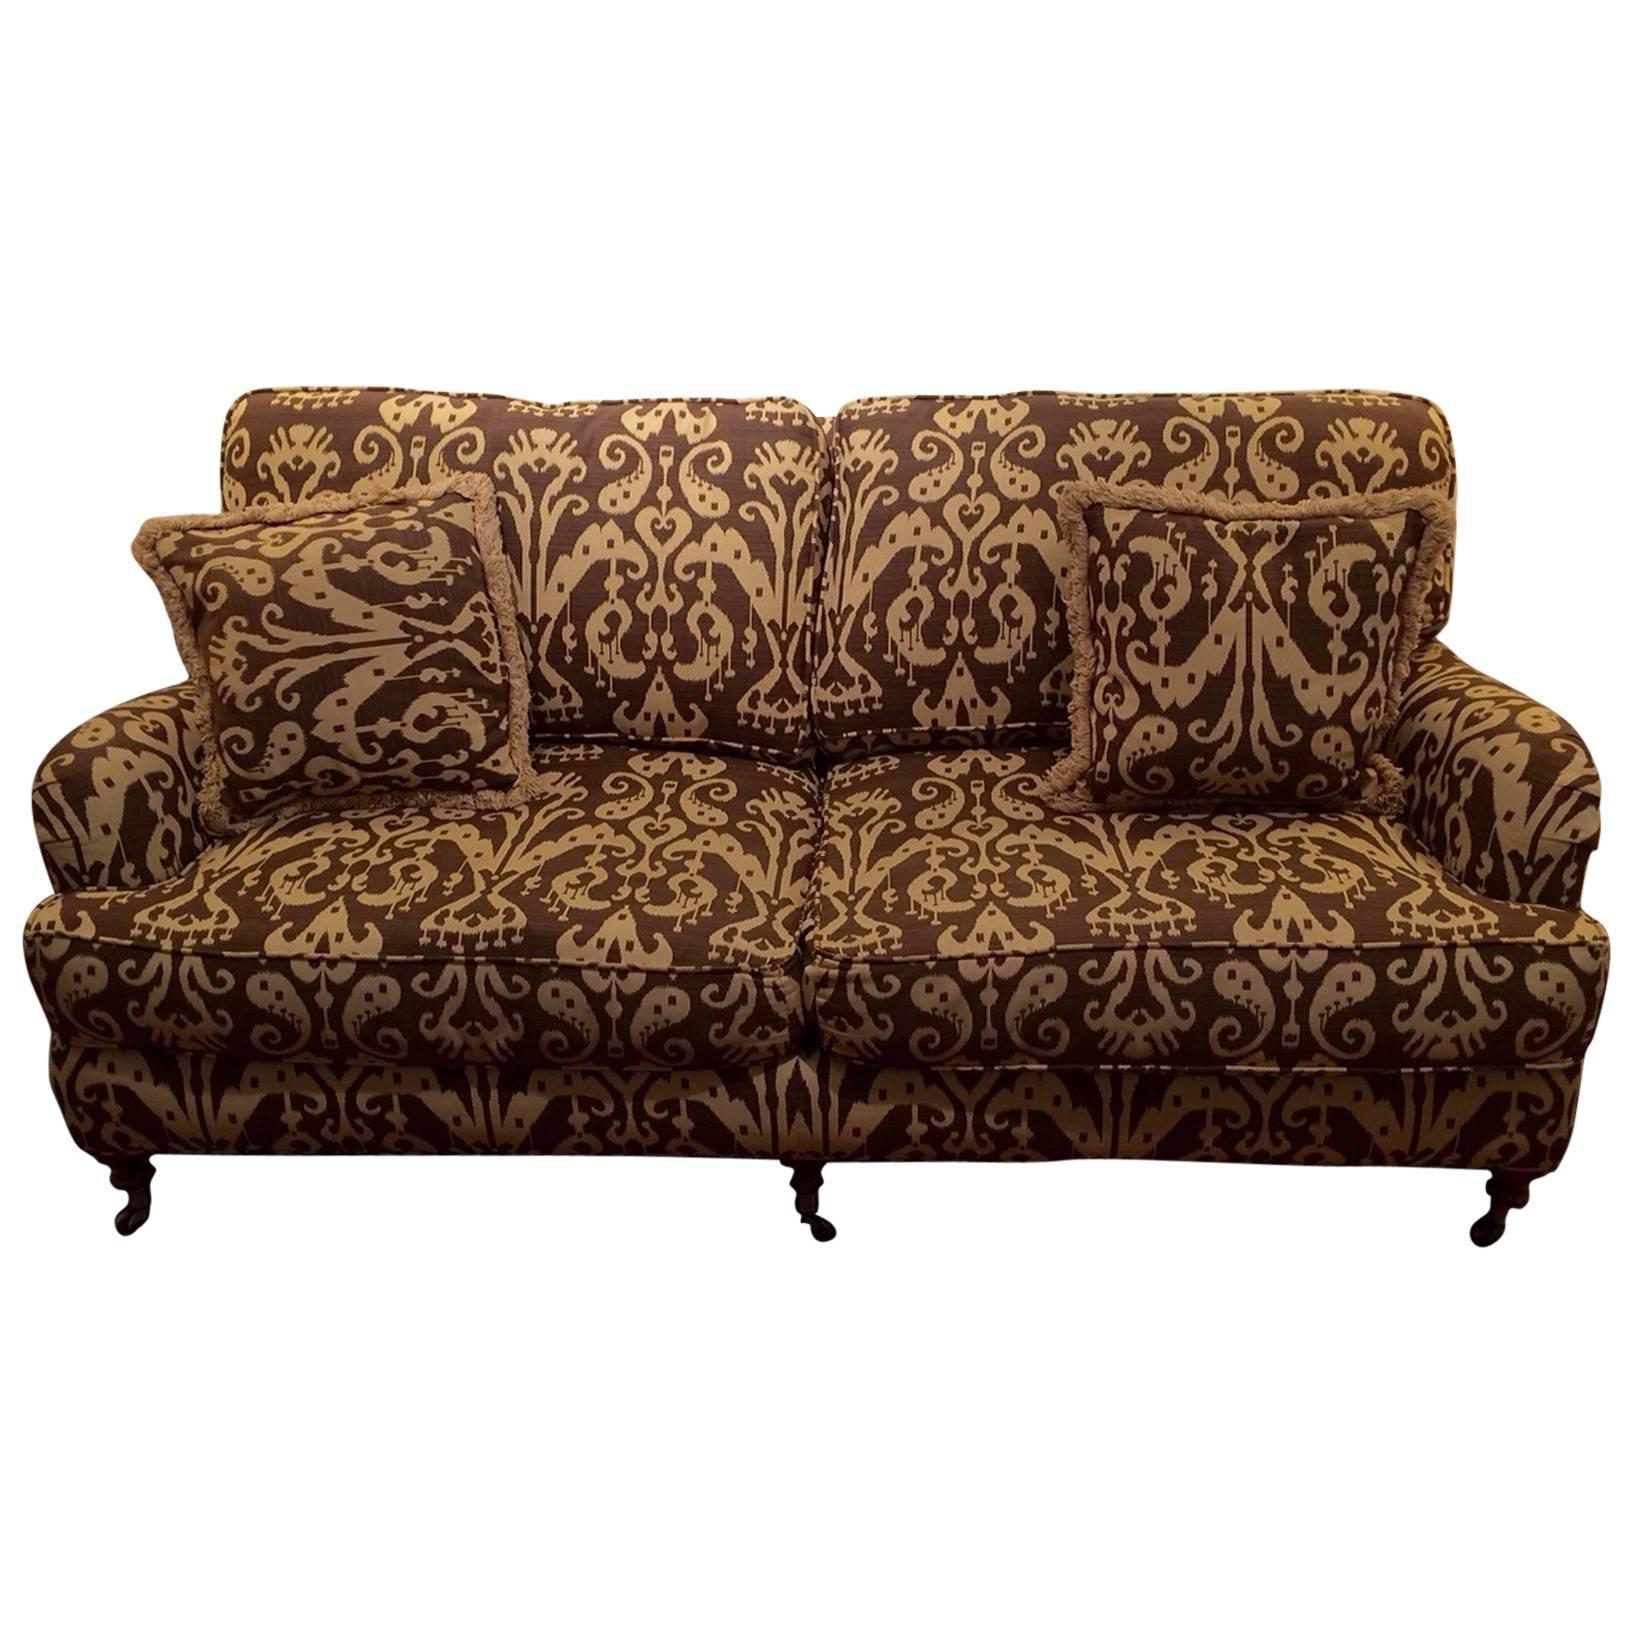 Handsome Brown and Cream Ikat Upholstered Couch